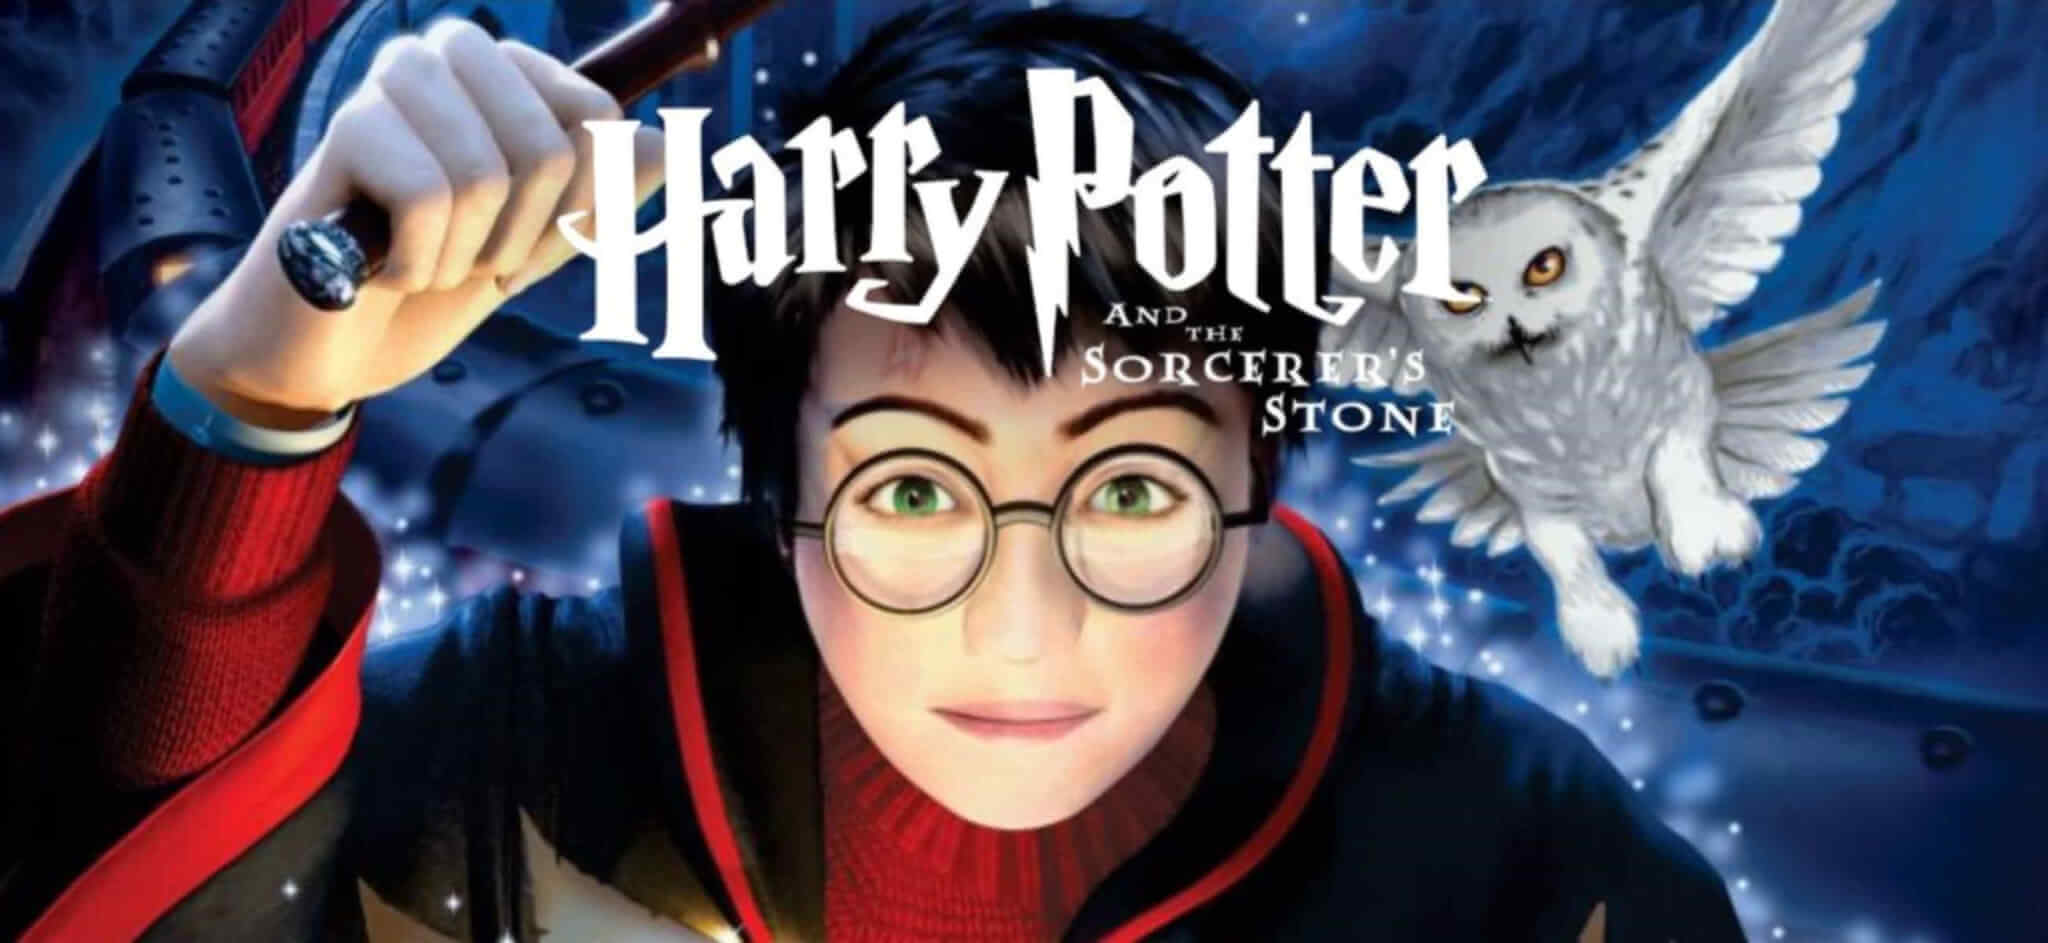 Want to play a Harry Potter online game? Follow this guide